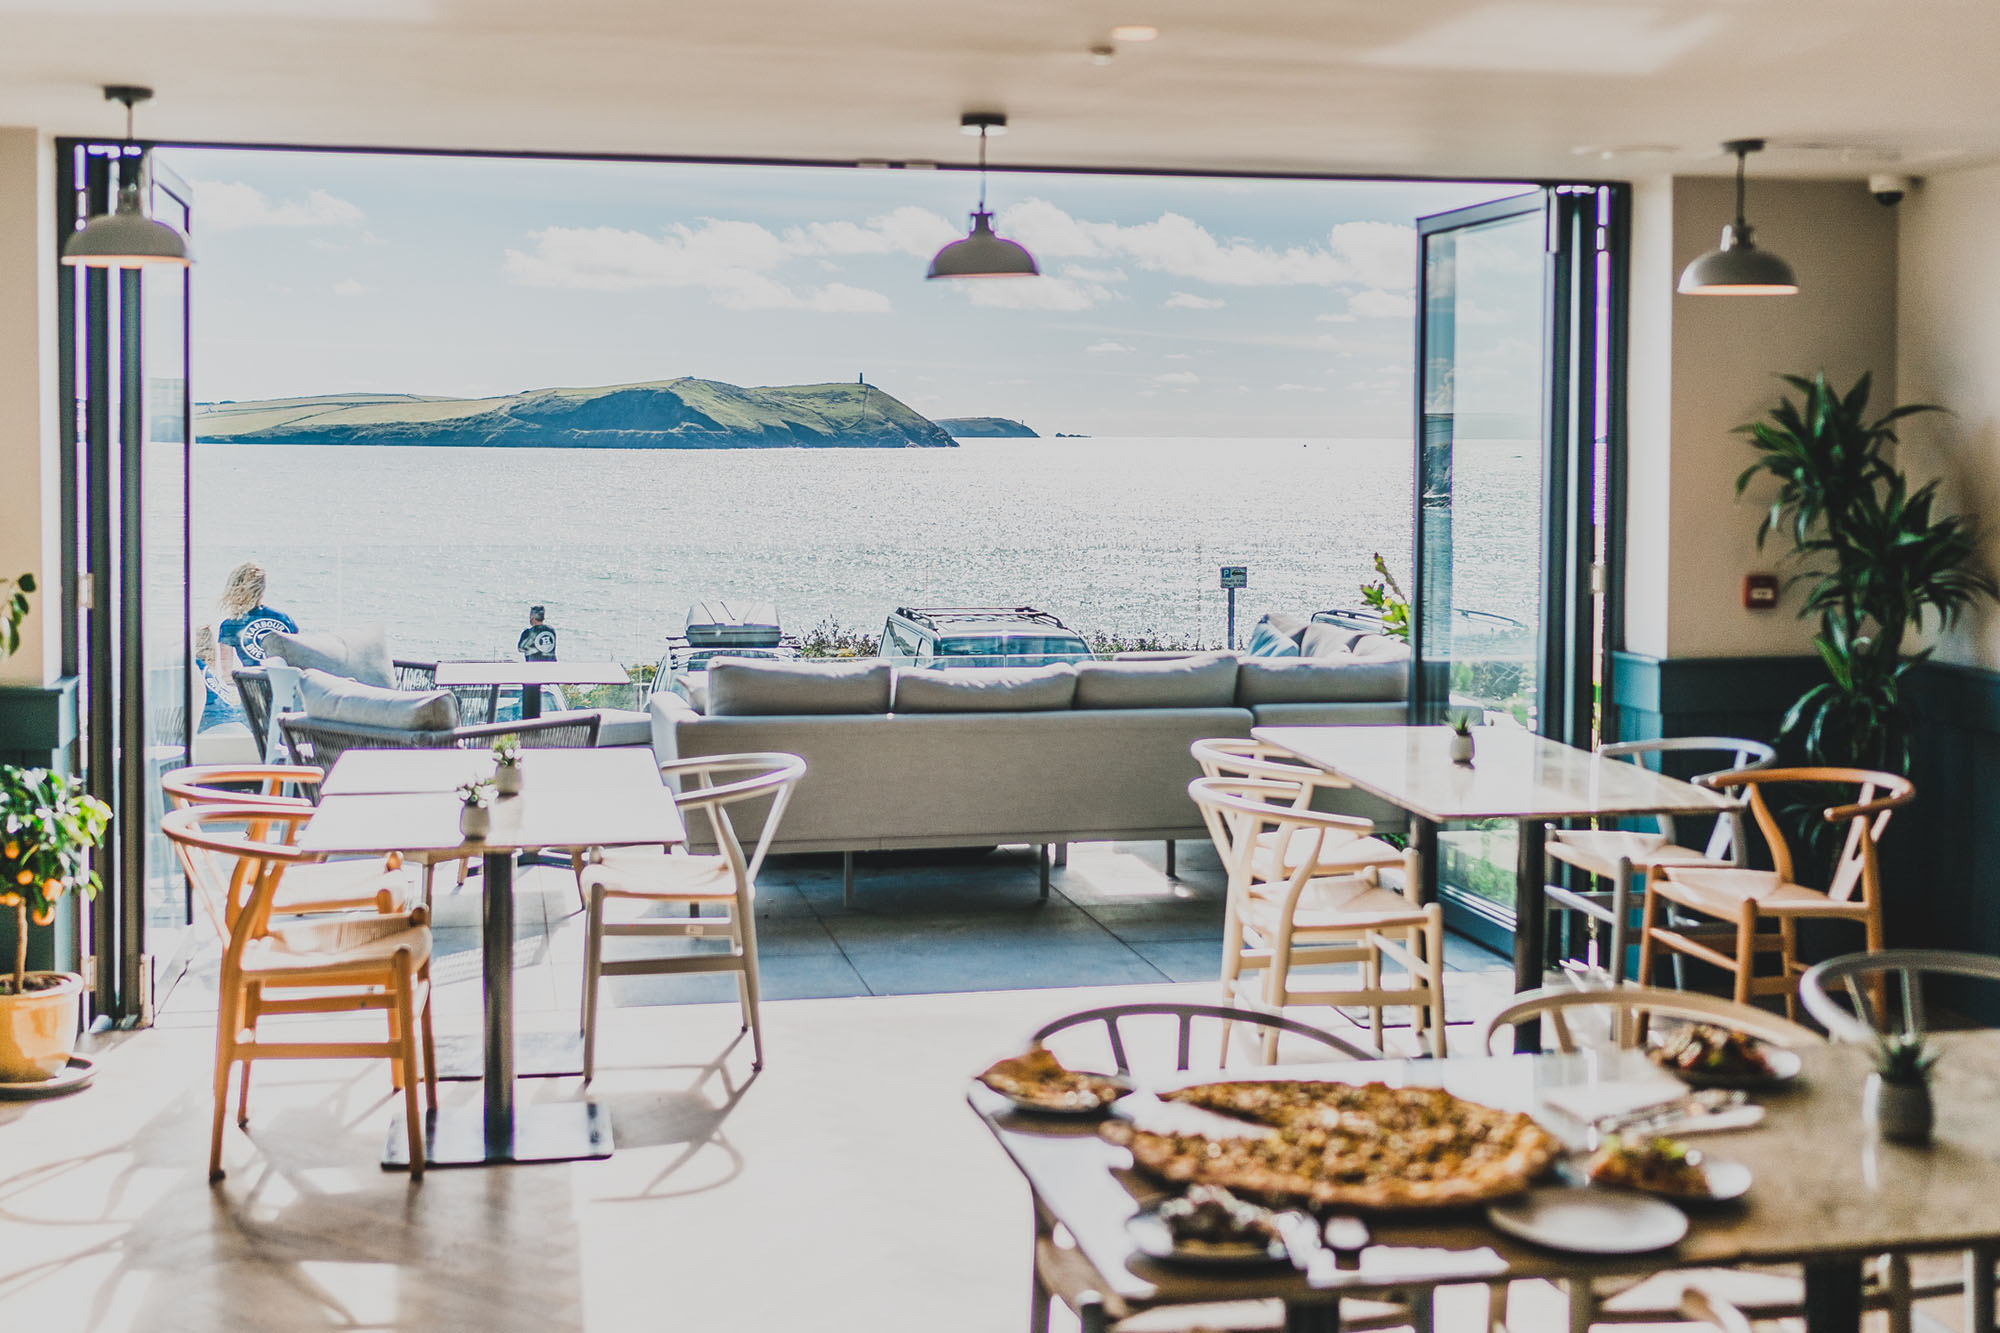 Views from The Atlantic Bar and Kitchen.